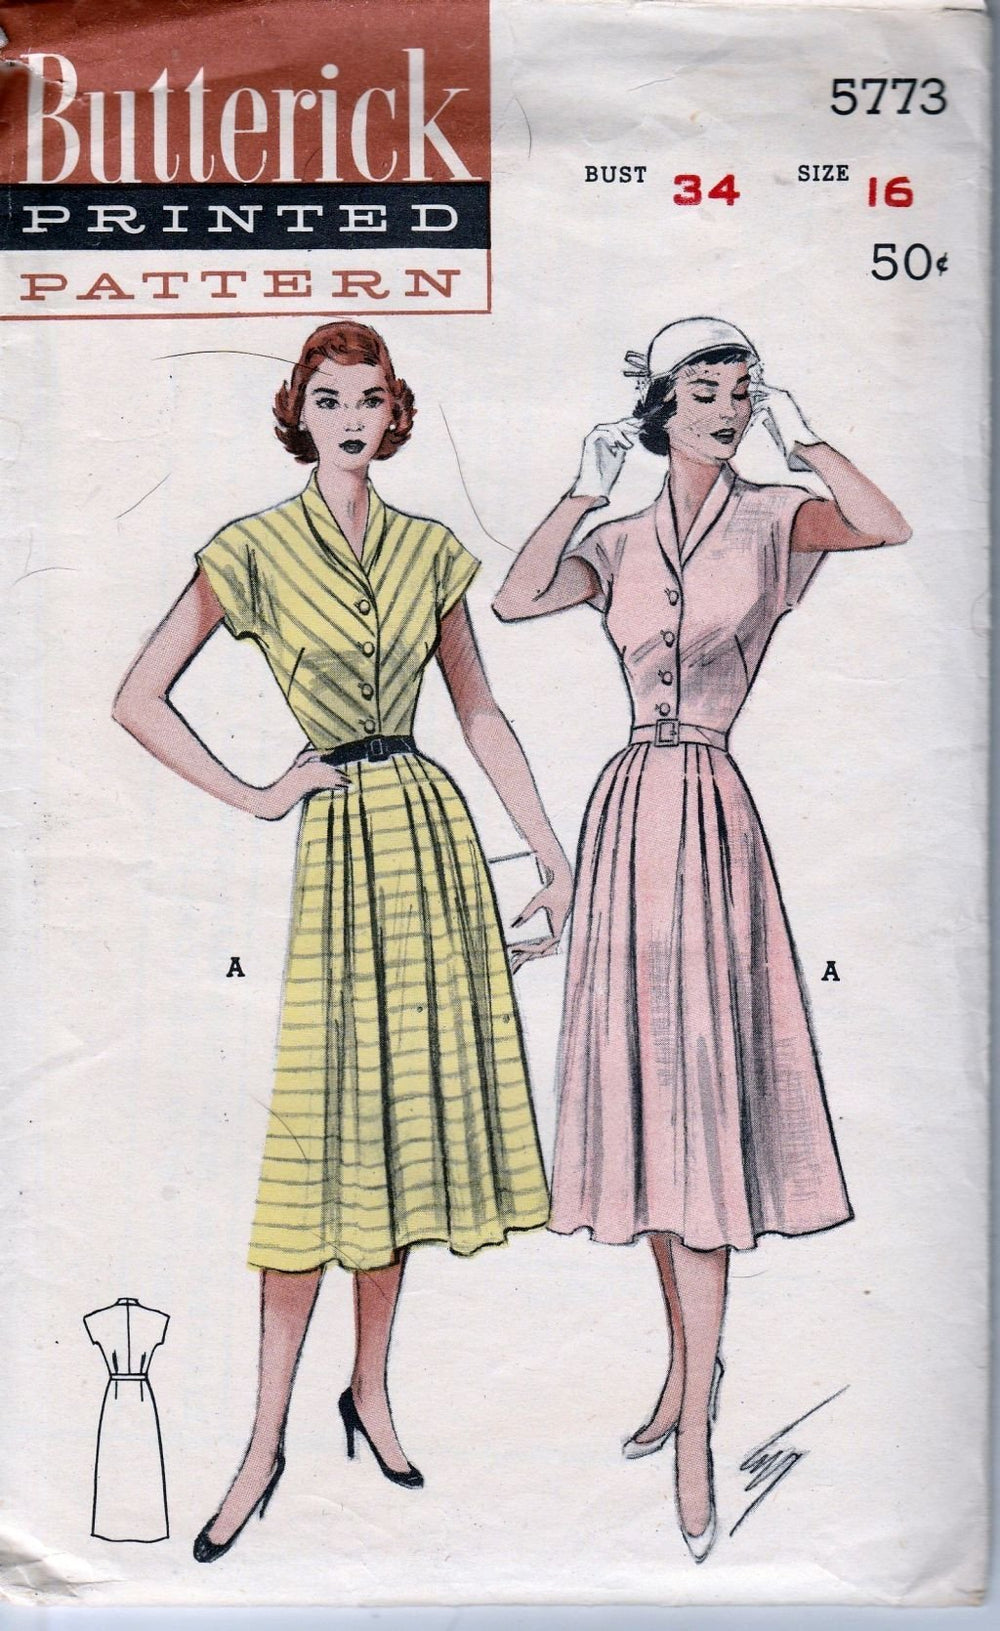 Butterick 5773 Vintage 1950's Sewing Pattern Ladies Casual Shirtwaist House Dress - VintageStitching - Vintage Sewing Patterns